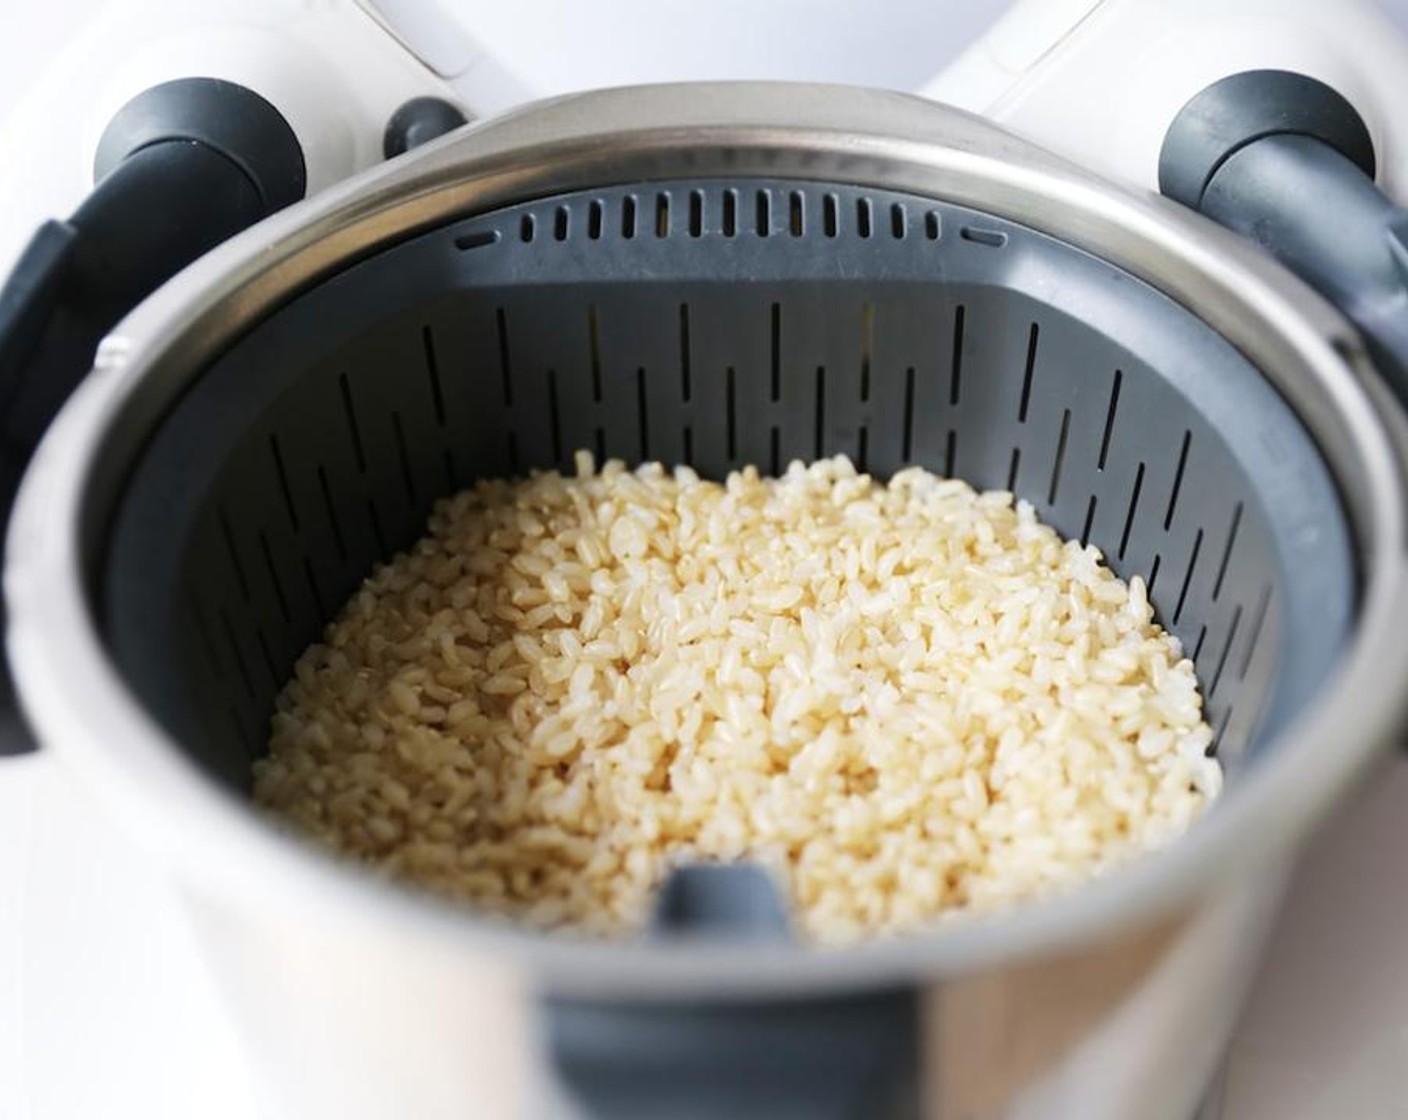 step 1 Cook the Mahatma® 100% Whole Grain Brown Rice (2/3 cup) by placing Water (2.6 lb) in the Thermomix jug. Pour the rice into the basket and place in the jug.